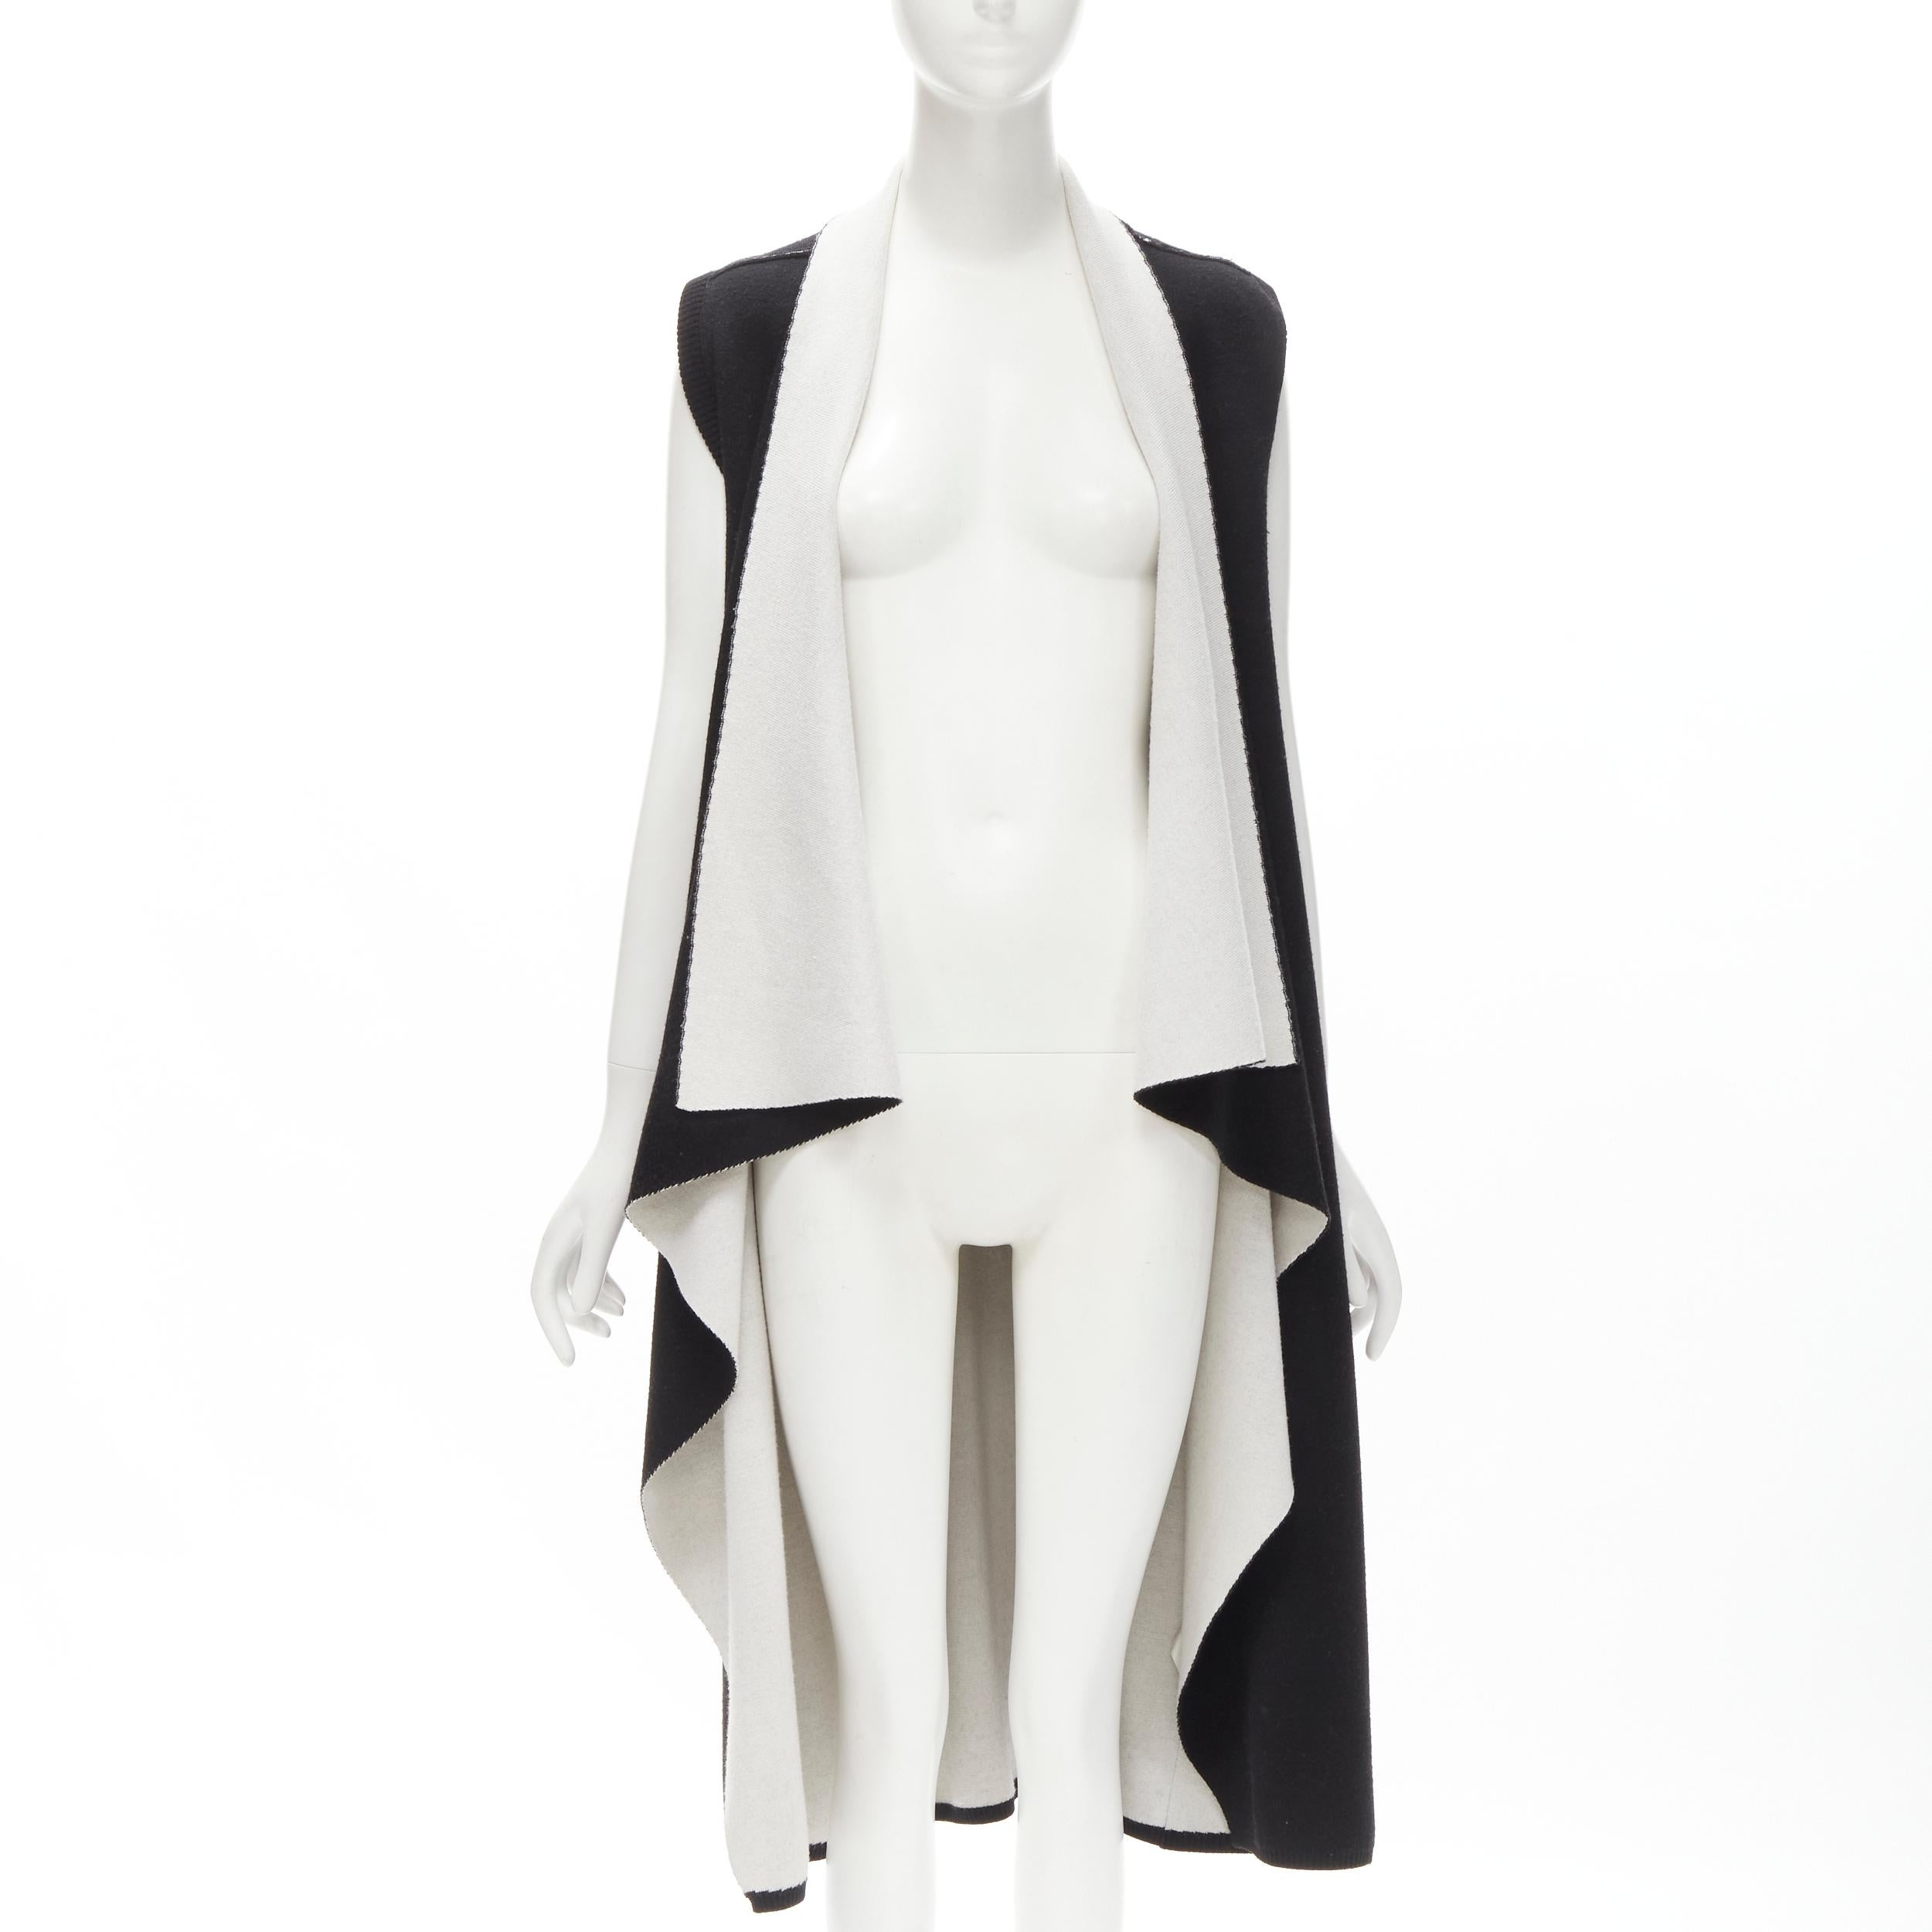 ALICE OLIVIA 100% wool black grey waterfall draped collar long vest XS
Brand: Alice Olivia
Material: Wool
Color: Black
Pattern: Solid
Made in: China

CONDITION:
Condition: Excellent, this item was pre-owned and is in excellent condition.